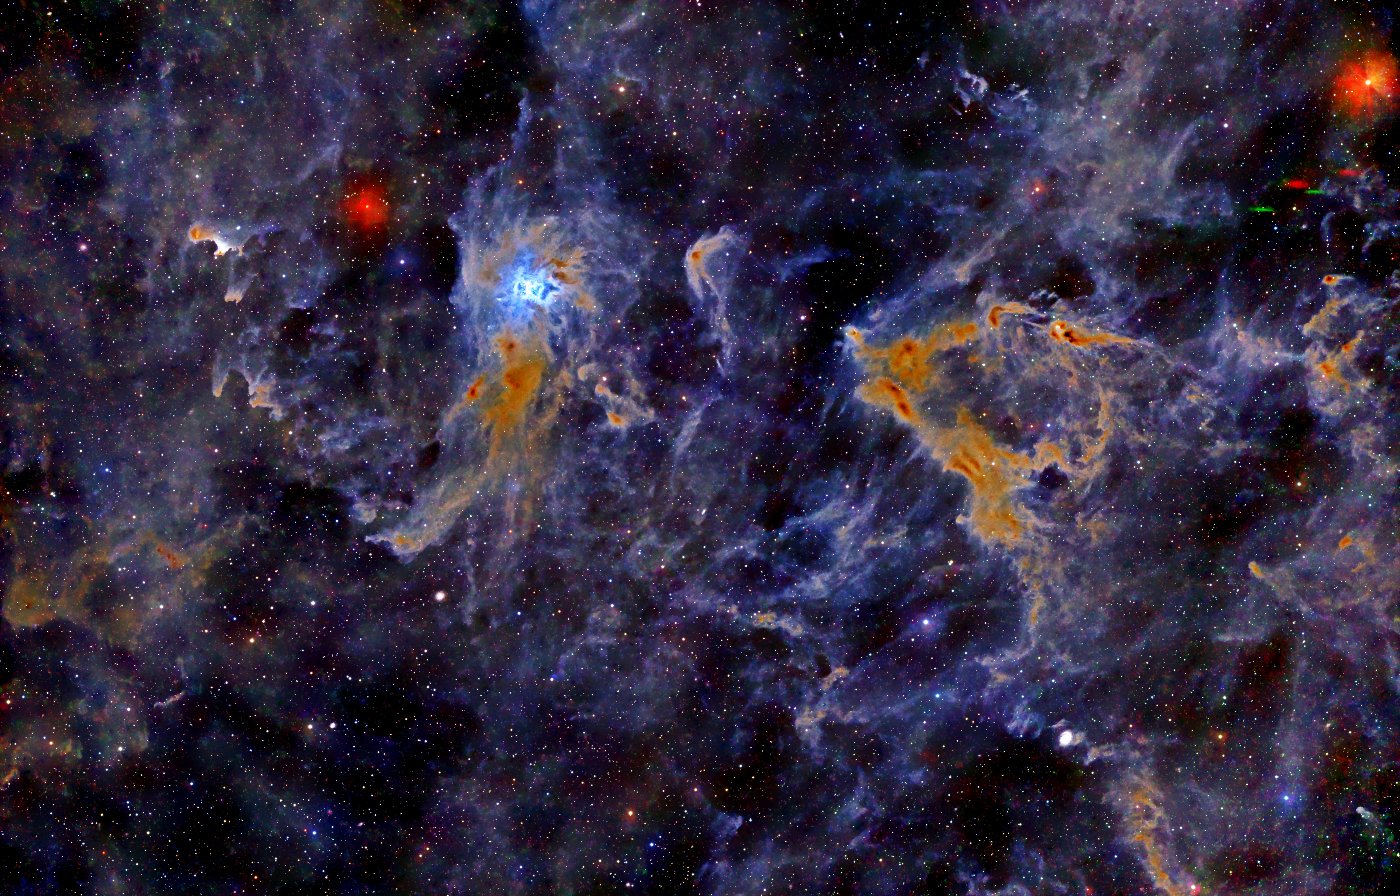 NGC 7023 (Iris Nebula) and Molecular Clouds in Cepheus with SDSS I', R' and G' filters